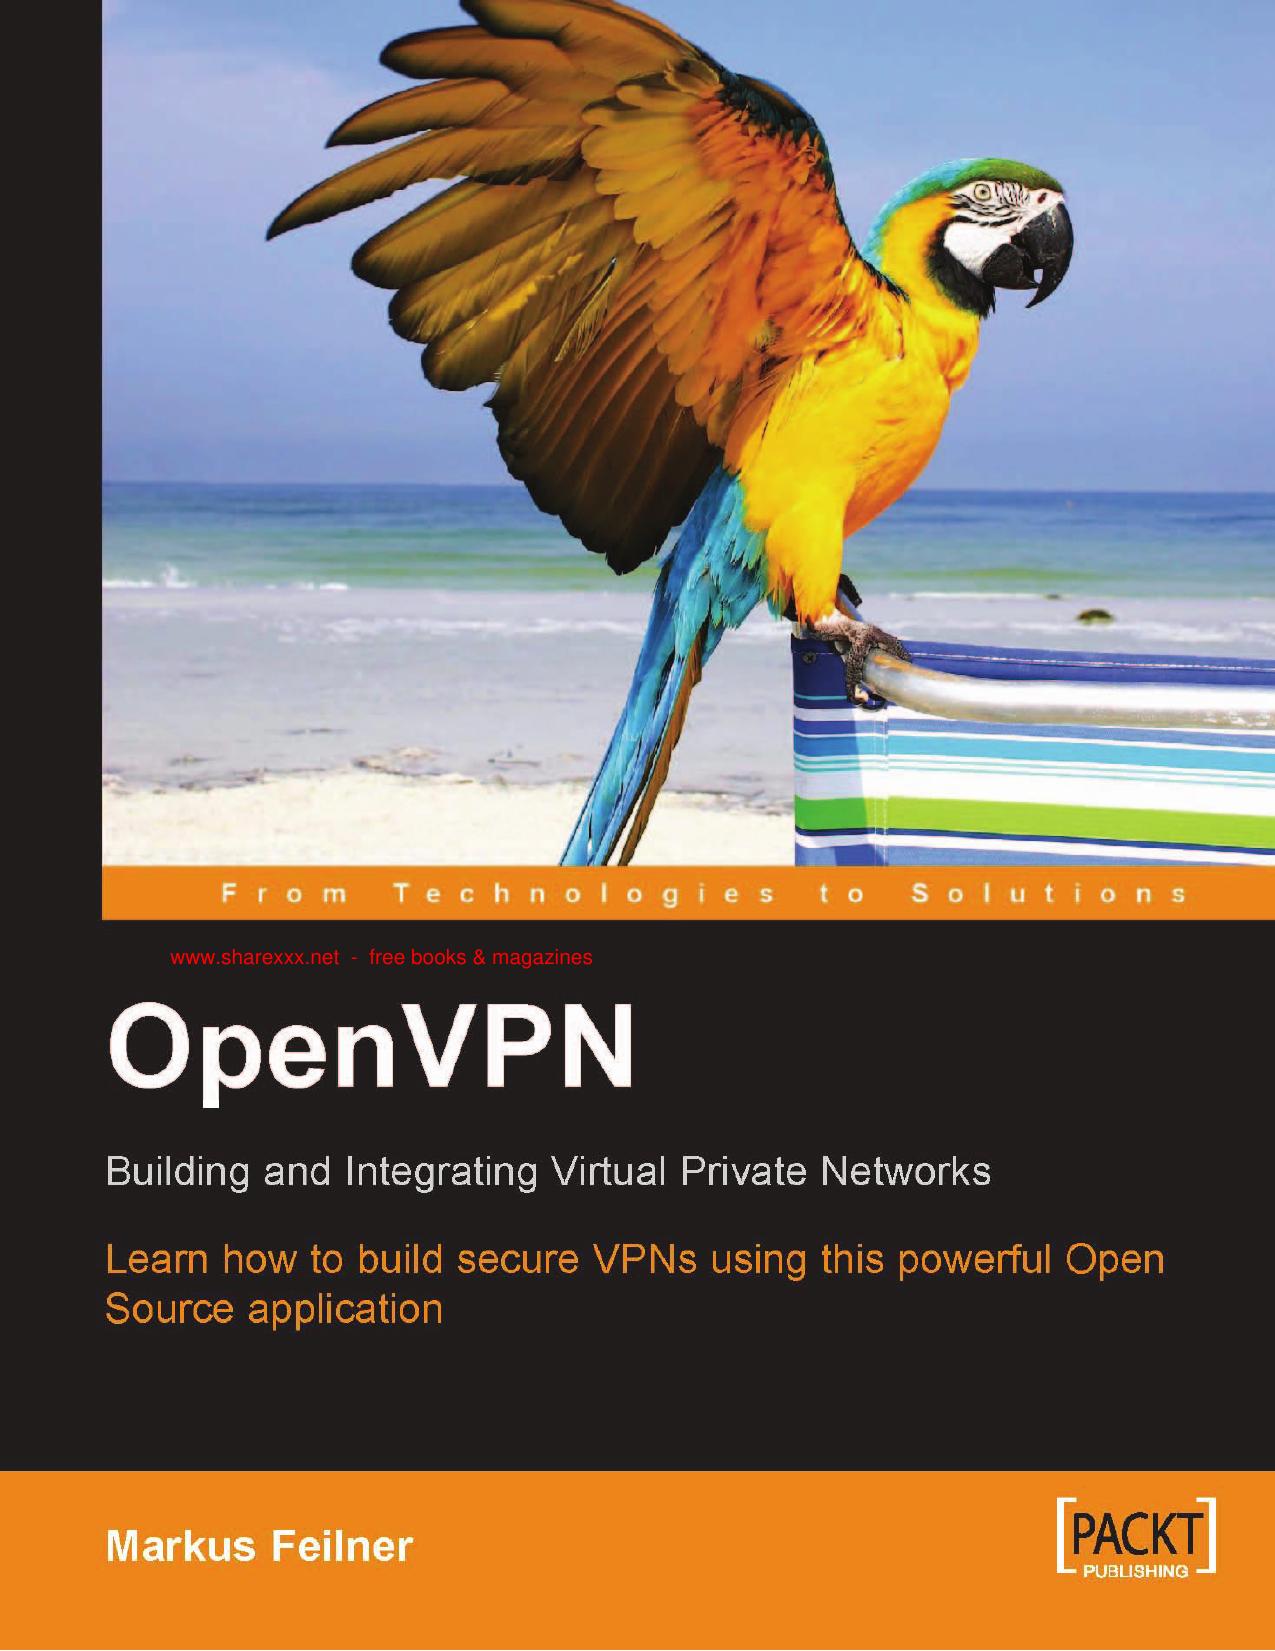 Open VPN: Building and Operating Virtual Private Networks